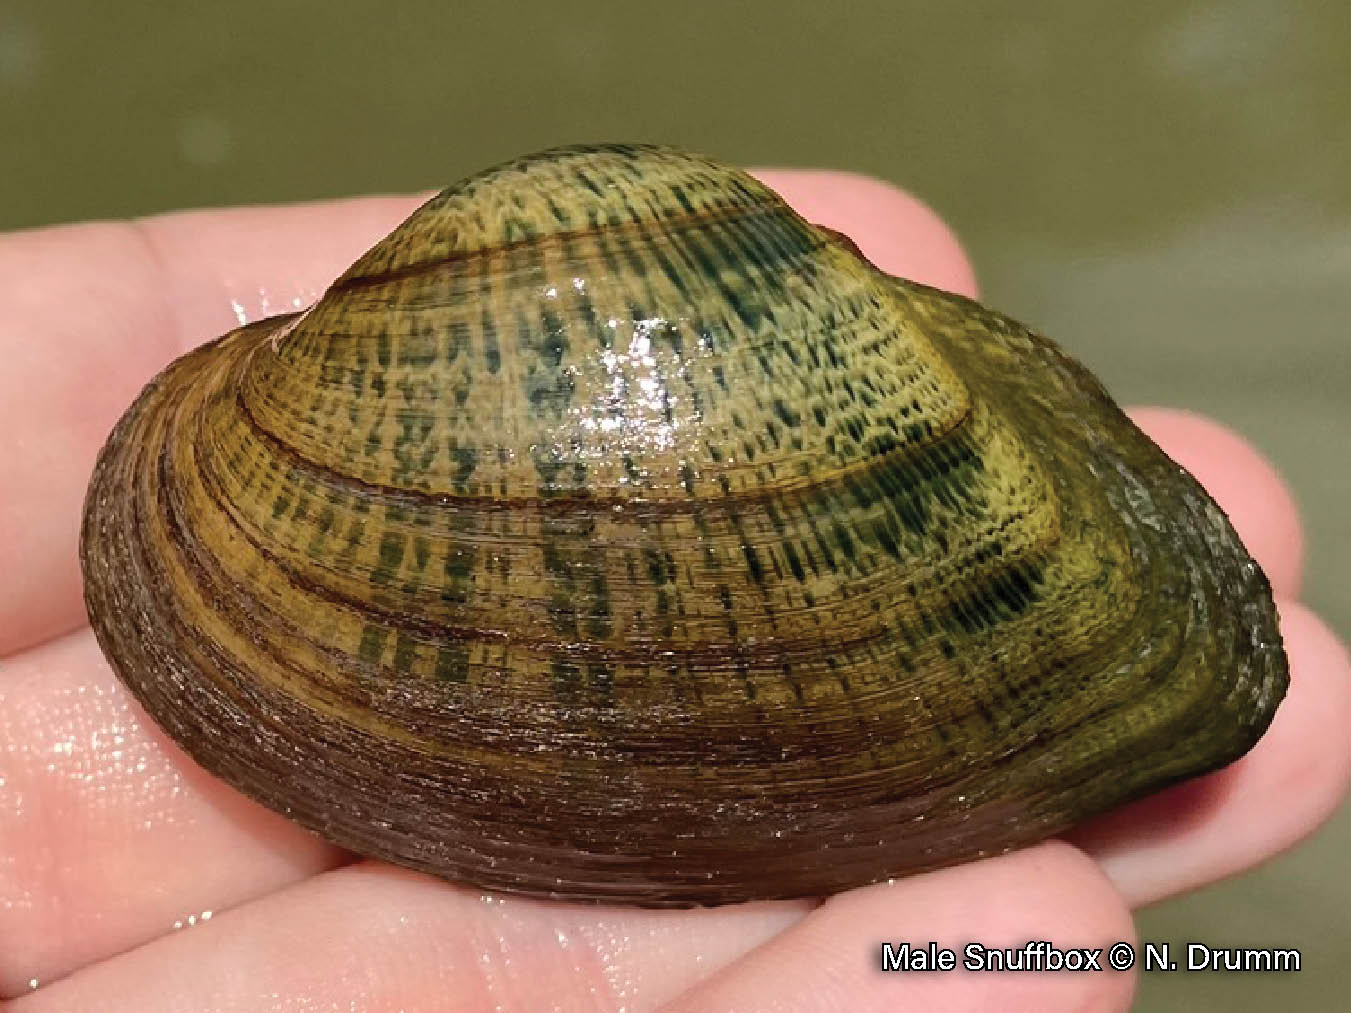 Picture of a Snuffbox mussel, a small, triangular mussel with an inflated shell that has a posterior ridge and is yellowish-brown with green rays that look like dripping paint.